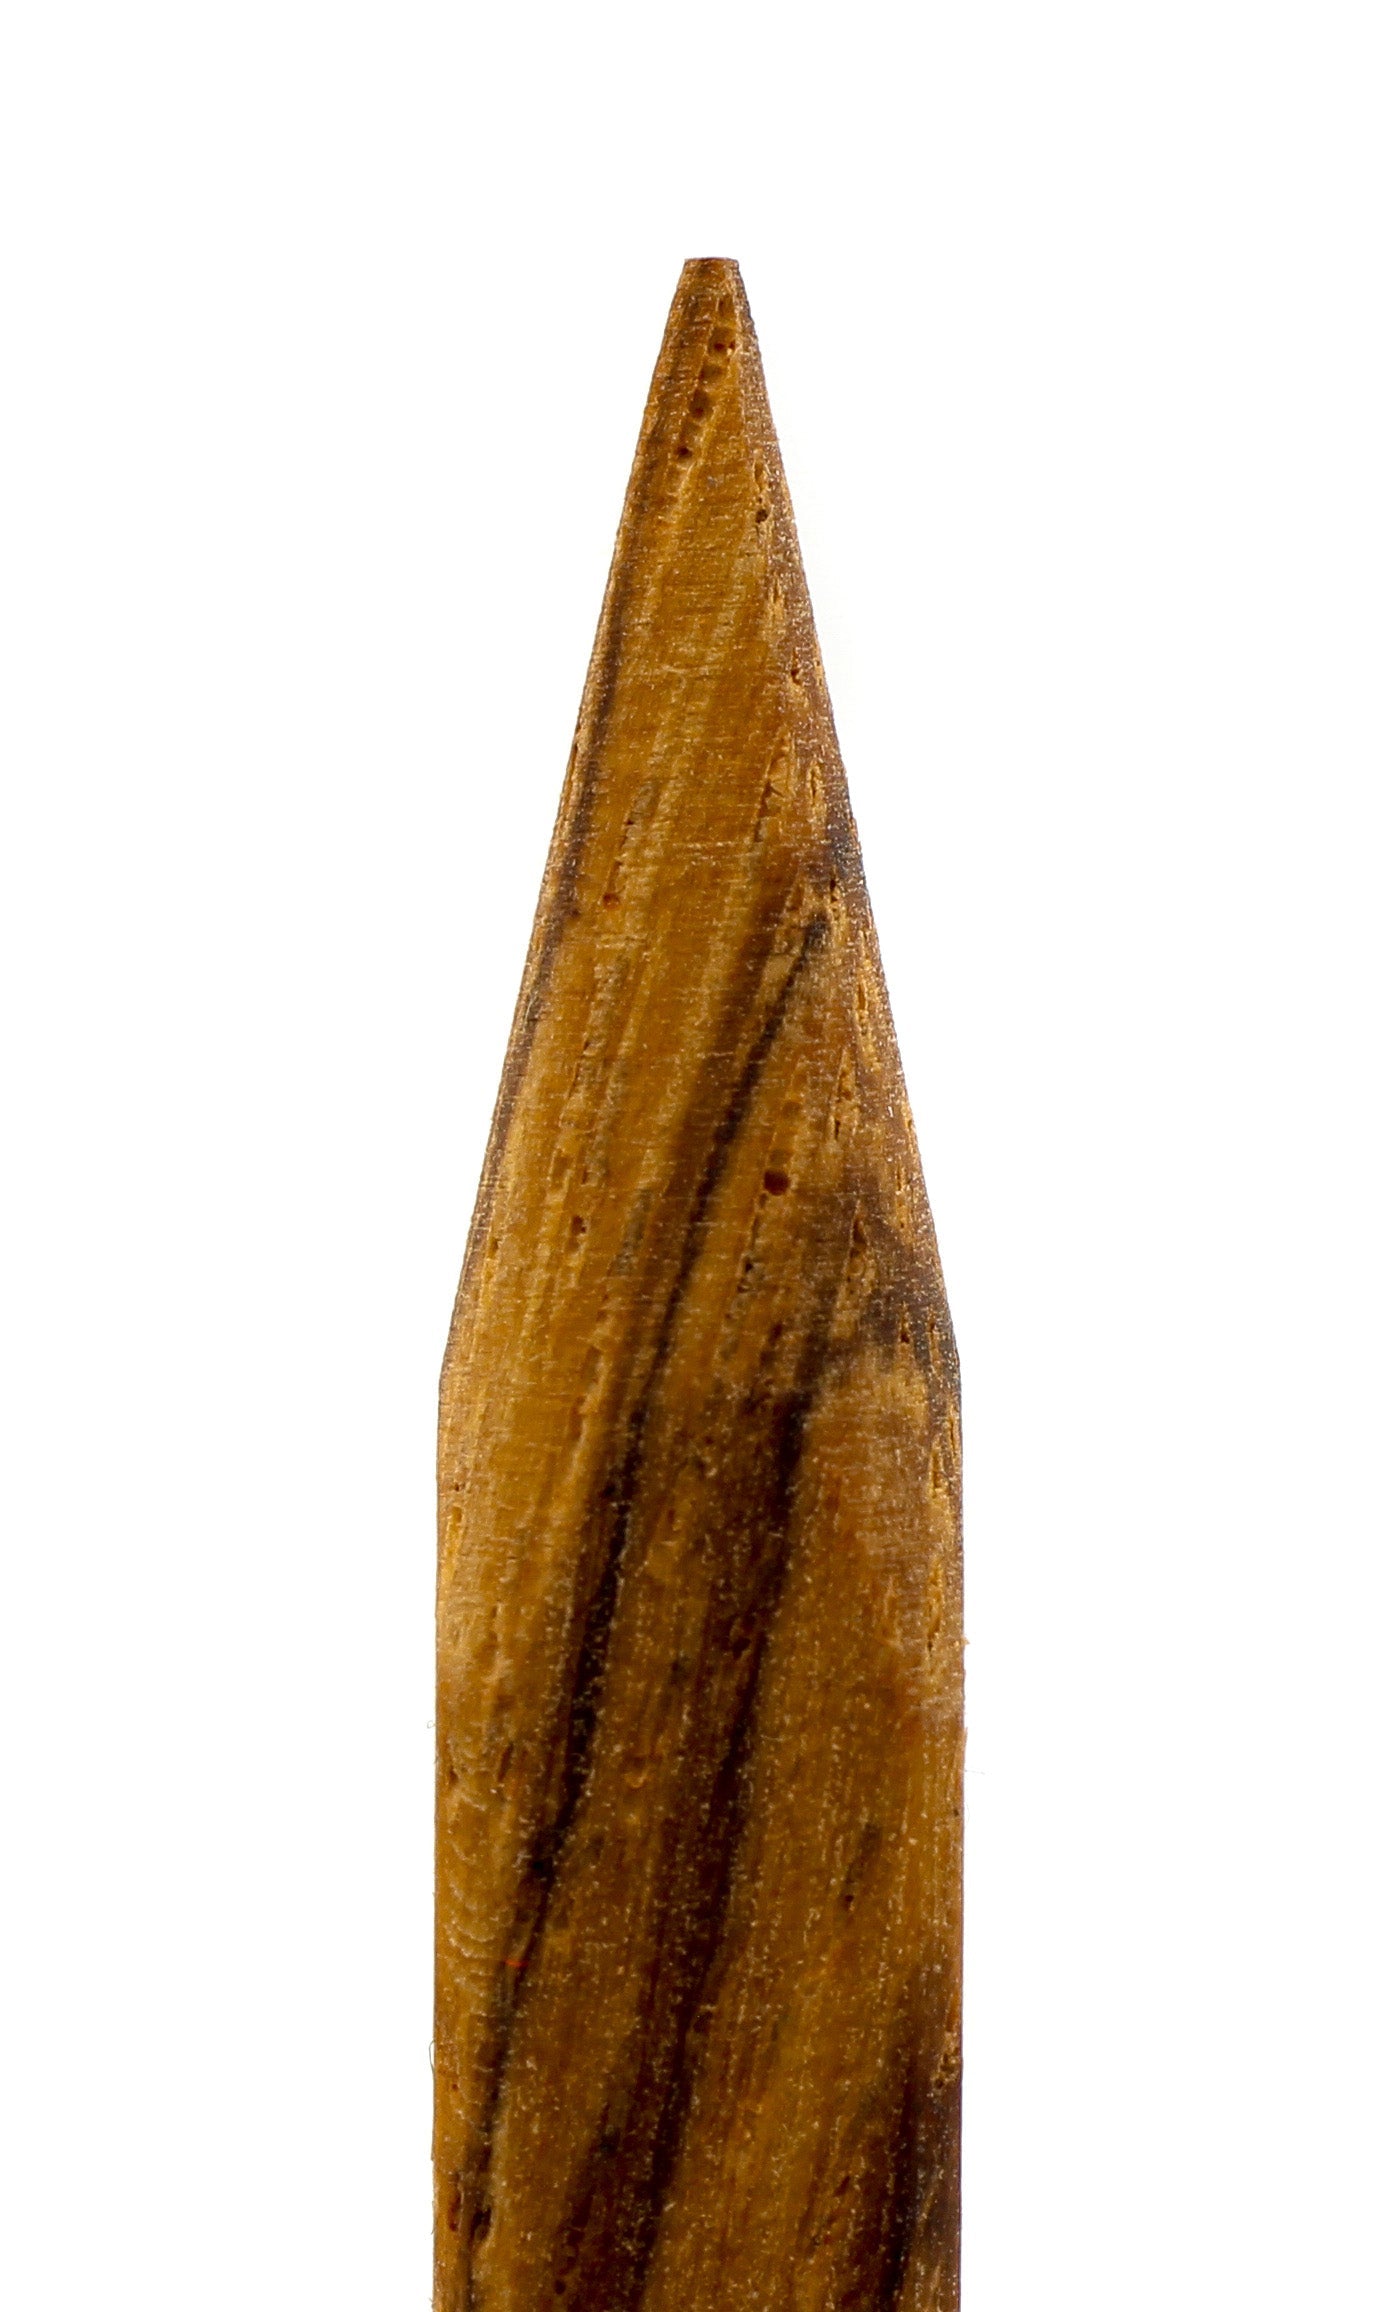 P5 Curved Square Tip 9 mm Carving Tool, aka Relief Carver